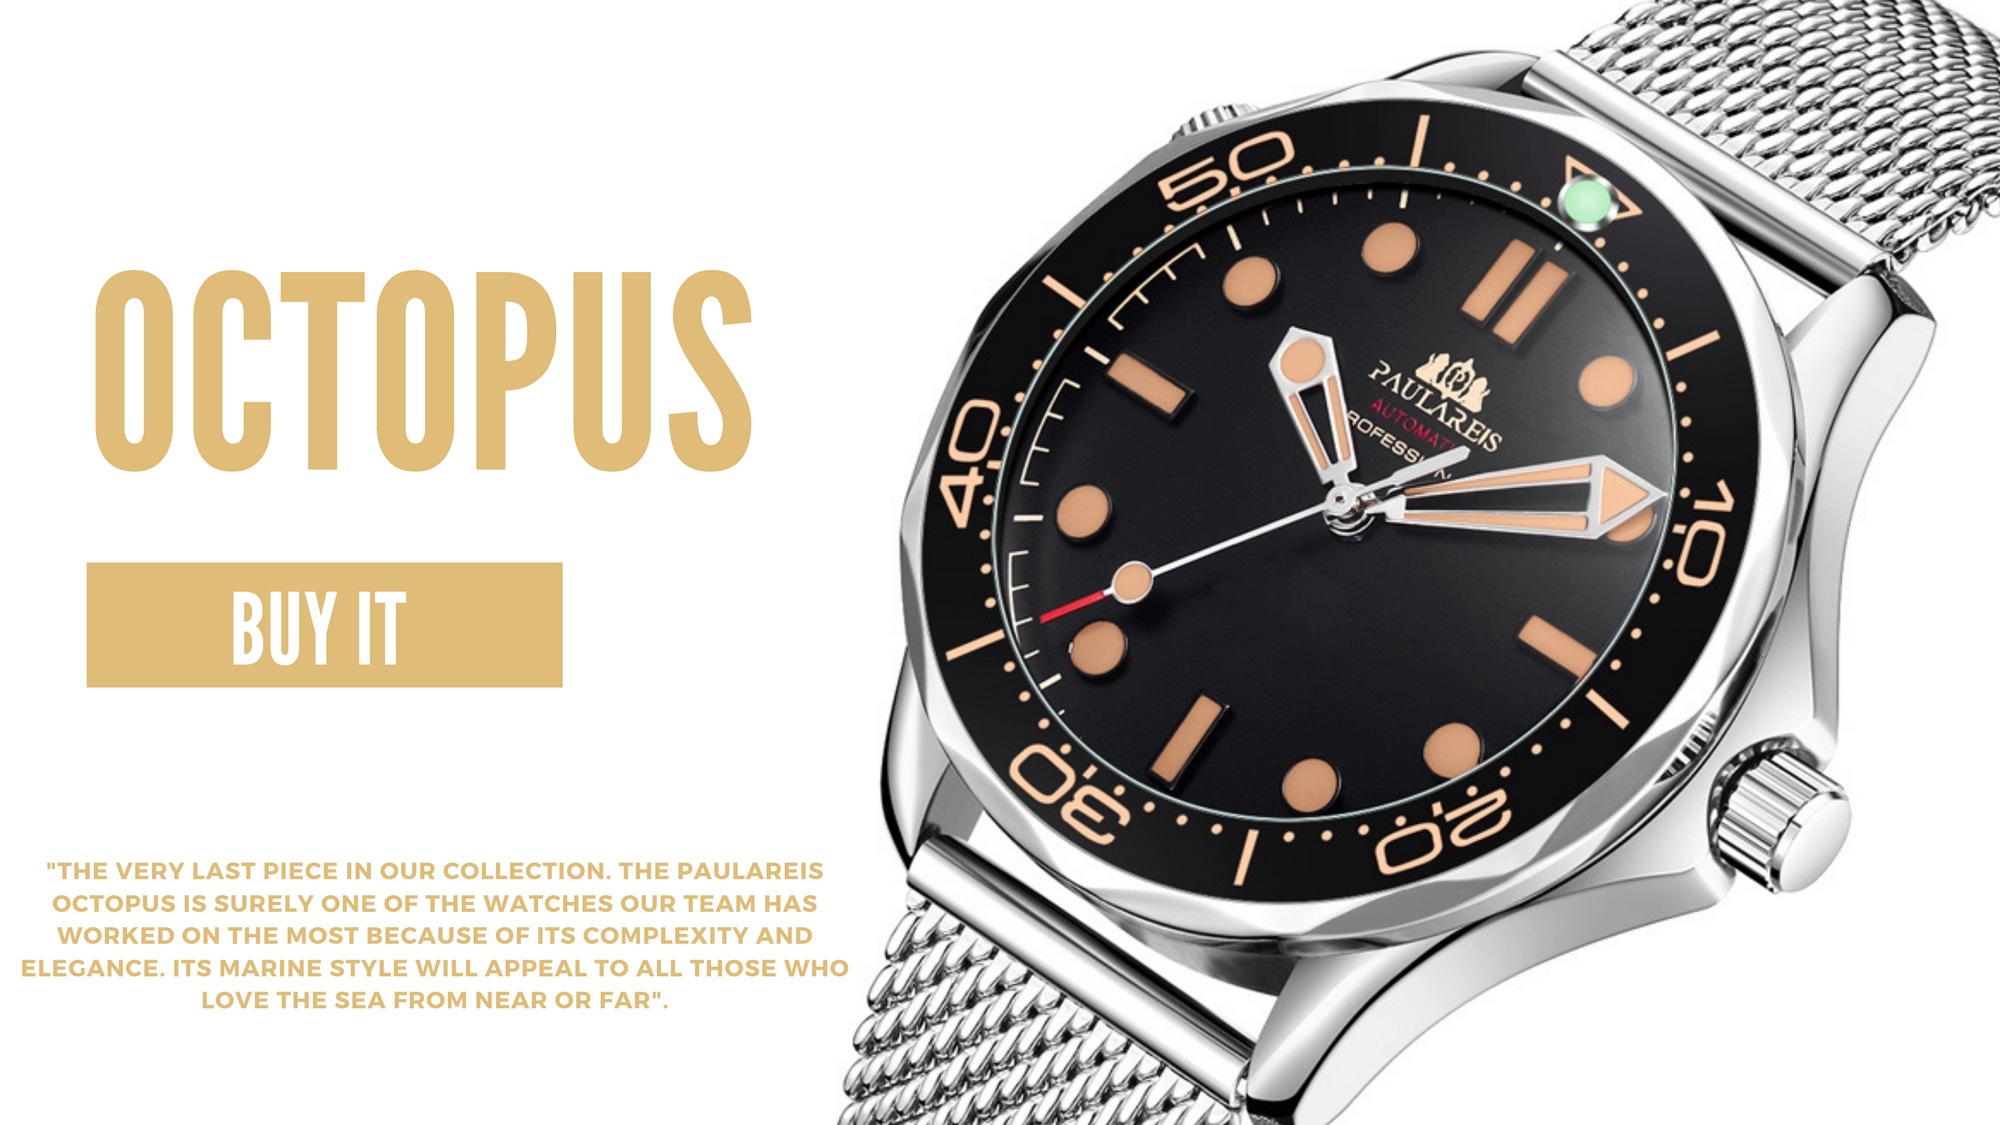 The very last piece in our collection. The Paulareis Octopus is surely one of the watches our team has worked on the most because of its complexity and elegance. Its marine style will appeal to all those who love the sea from near or far.